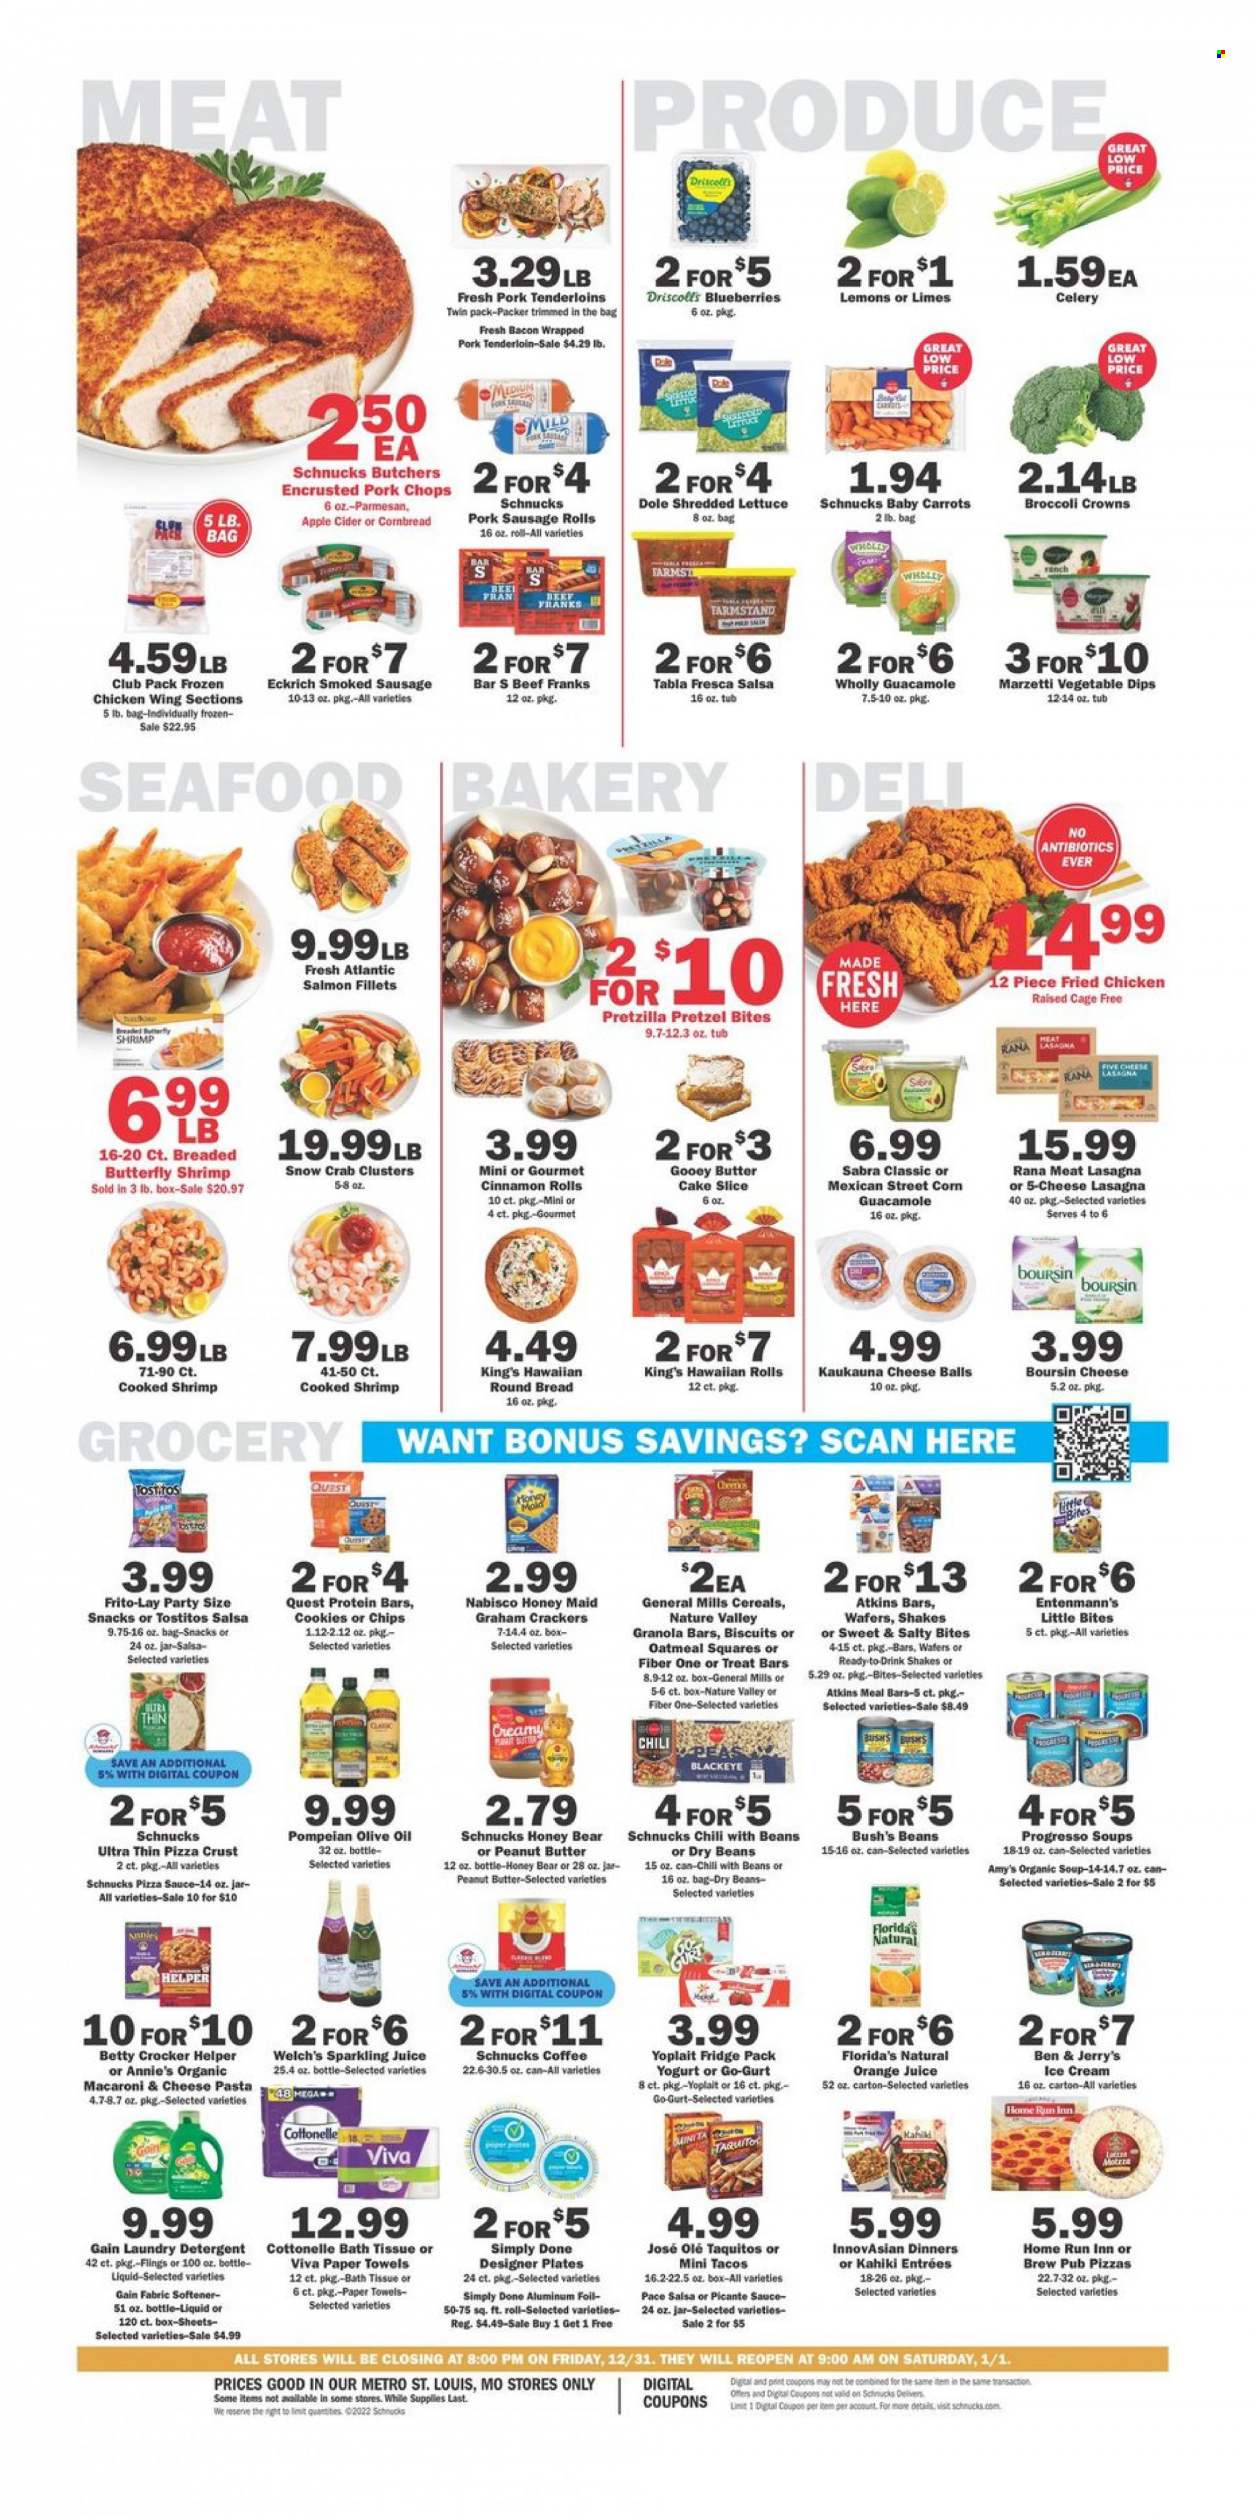 thumbnail - Schnucks Flyer - 12/29/2021 - 01/04/2022 - Sales products - bread, sausage rolls, pretzels, corn bread, tacos, cinnamon roll, hawaiian rolls, Entenmann's, lettuce, Dole, shredded lettuce, blueberries, limes, Welch's, salmon, salmon fillet, seafood, crab, shrimps, macaroni & cheese, soup, pasta, sauce, fried chicken, Progresso, lasagna meal, Annie's, taquitos, Rana, bacon, sausage, smoked sausage, pork sausage, guacamole, parmesan, yoghurt, Yoplait, shake, cage free eggs, ice cream, Ben & Jerry's, cookies, graham crackers, wafers, snack, crackers, biscuit, Little Bites, Florida's Natural, Cheetos, Frito-Lay, Tostitos, oatmeal, cereals, protein bar, granola bar, Honey Maid, Nature Valley, Fiber One, dry beans, dill, salsa, olive oil, peanut butter, orange juice, juice, sparkling juice, coffee, apple cider, cider, pork chops, pork meat, pork tenderloin, bath tissue, Cottonelle, kitchen towels, paper towels, detergent, Gain, fabric softener, laundry detergent, lemons. Page 4.